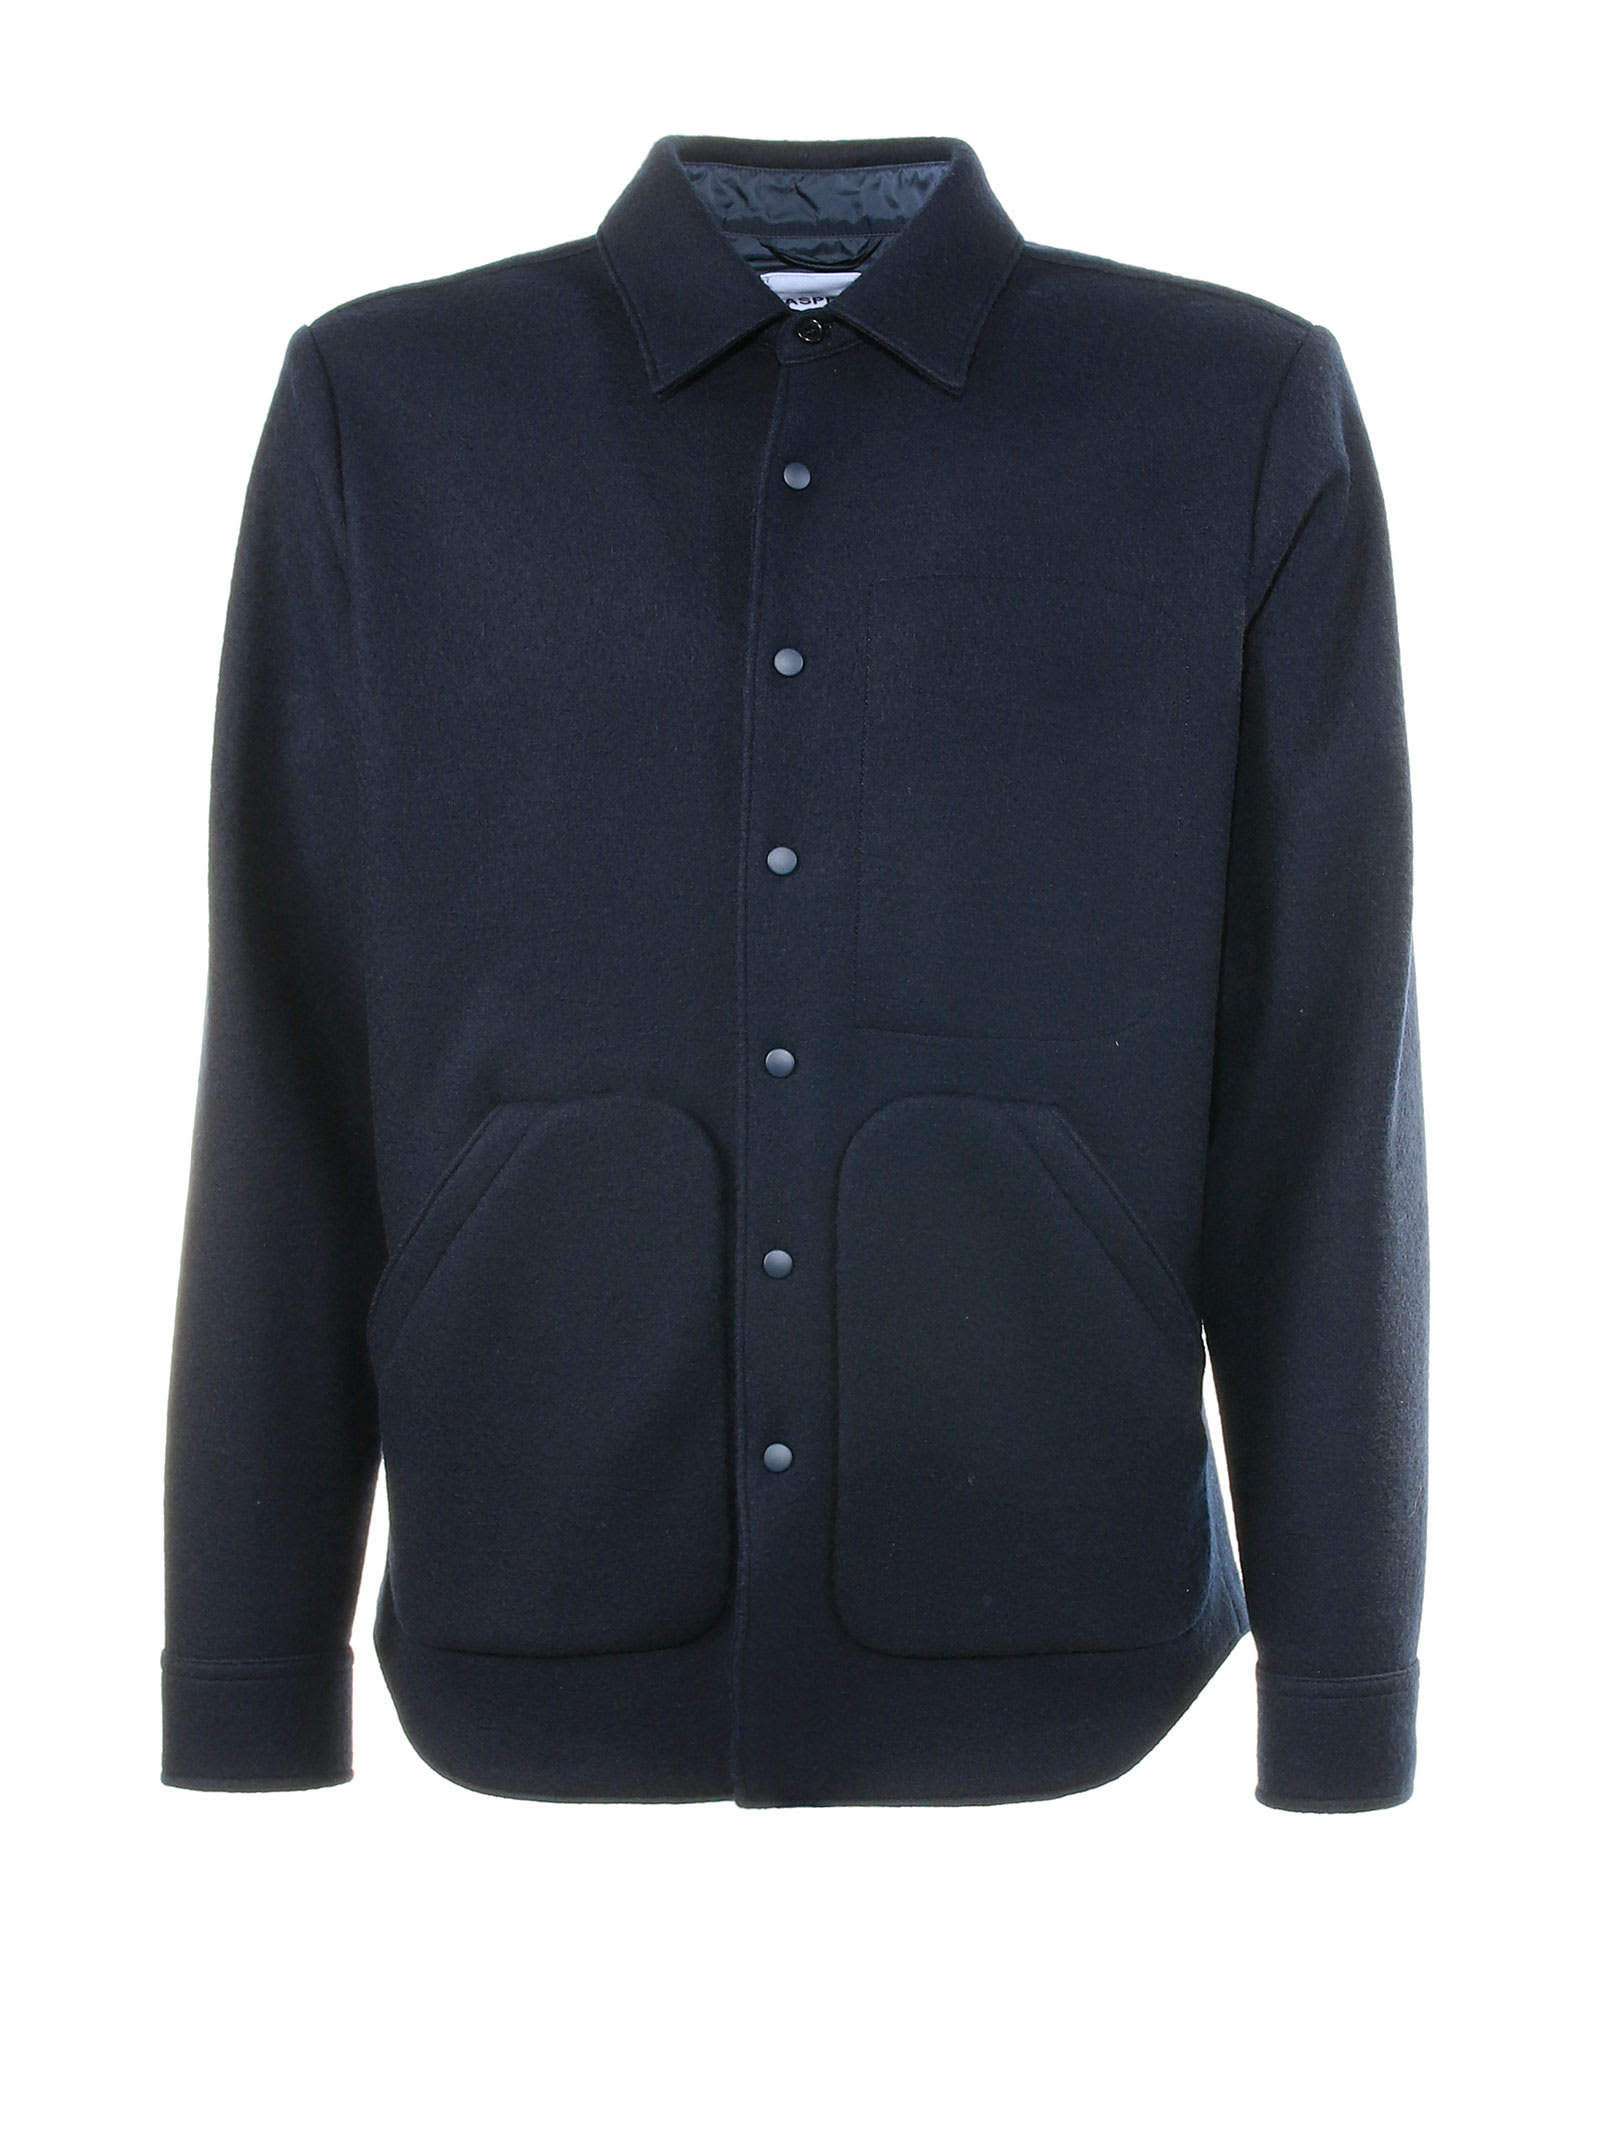 Aspesi Jacket With Buttons In Navy